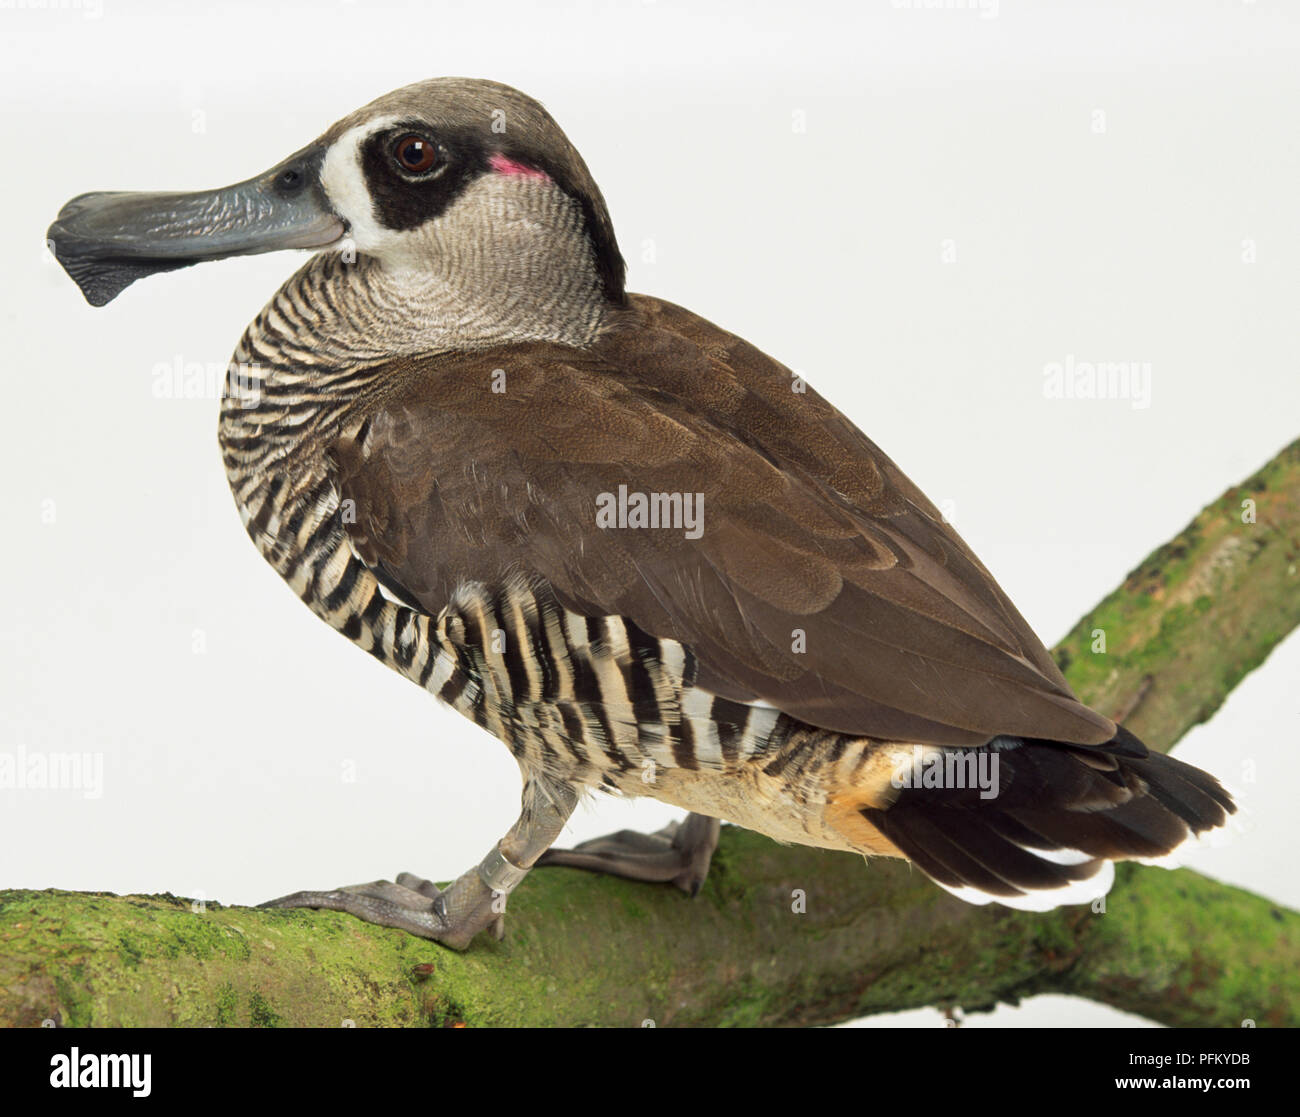 Rear side view of a Pink-Eared Duck, sometimes referred to as the zebra duck, perching on a lichen-covered branch, with head in profile showing the fleshly flap hanging from its bill, and pink ear patch. Stock Photo